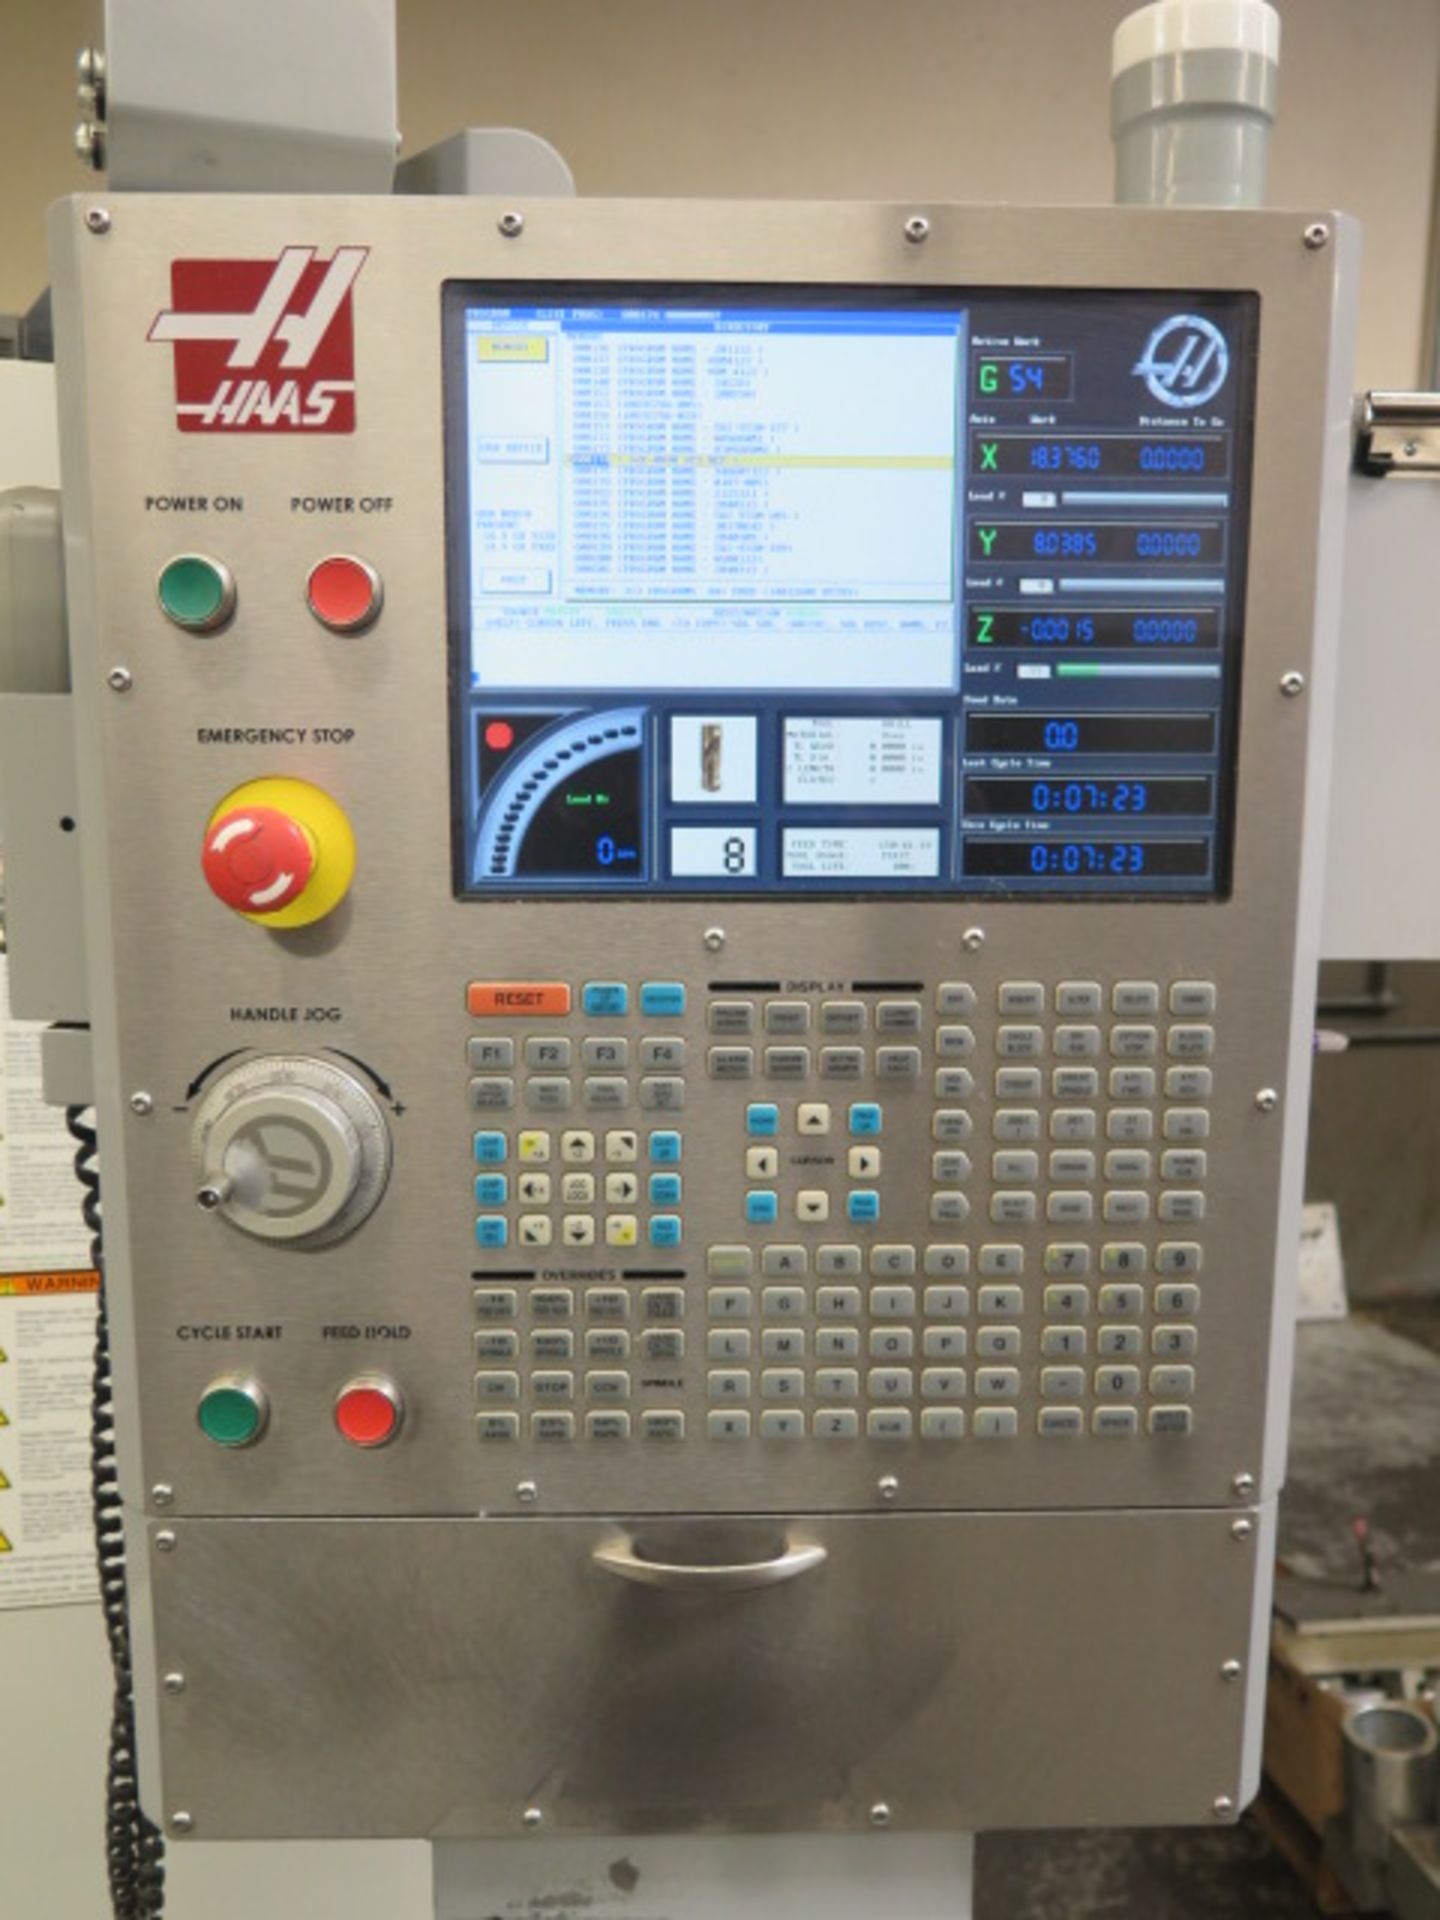 2007 Haas Super VF-2SS 4-Axis CNC Vertical Machining Center s/n 1062226 w/ Haas Controls, 24-Station - Image 9 of 13